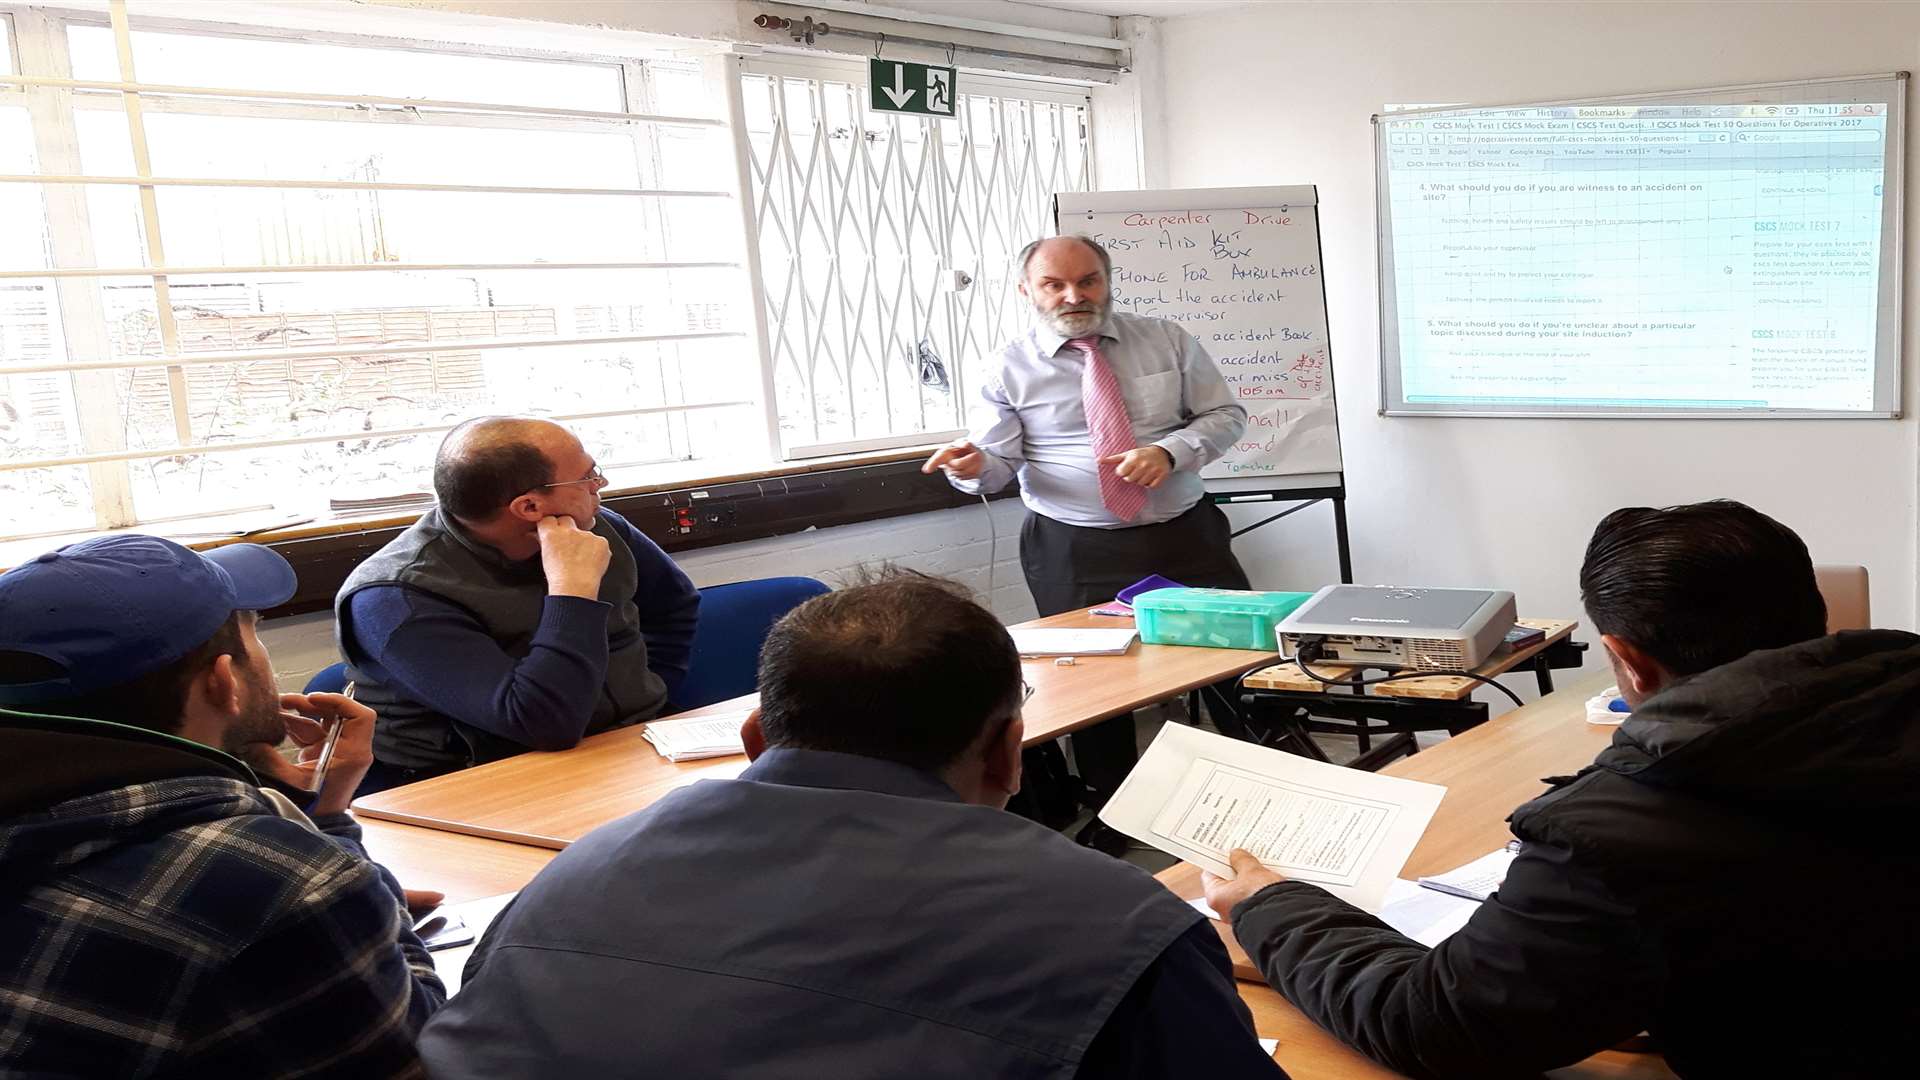 A group of Syrian refugees are being taught health and safety by Martin Carnall